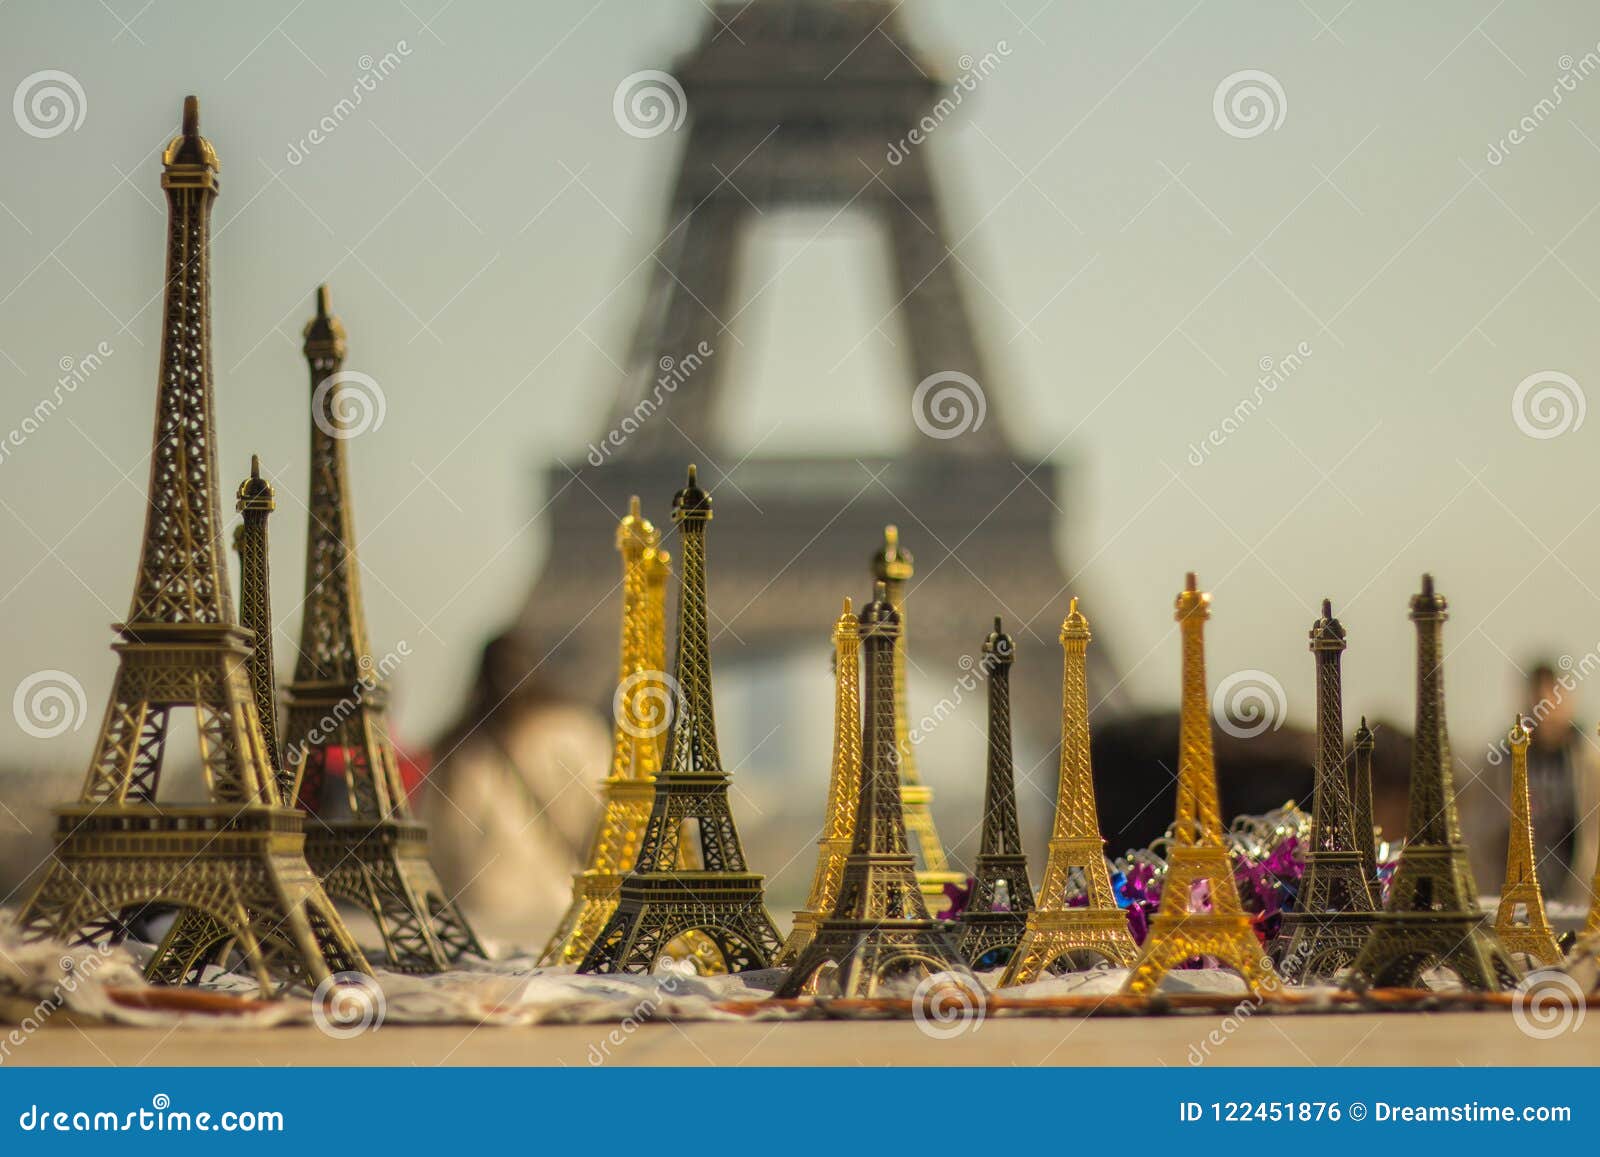 souvenirs of the eiffel tower in paris france